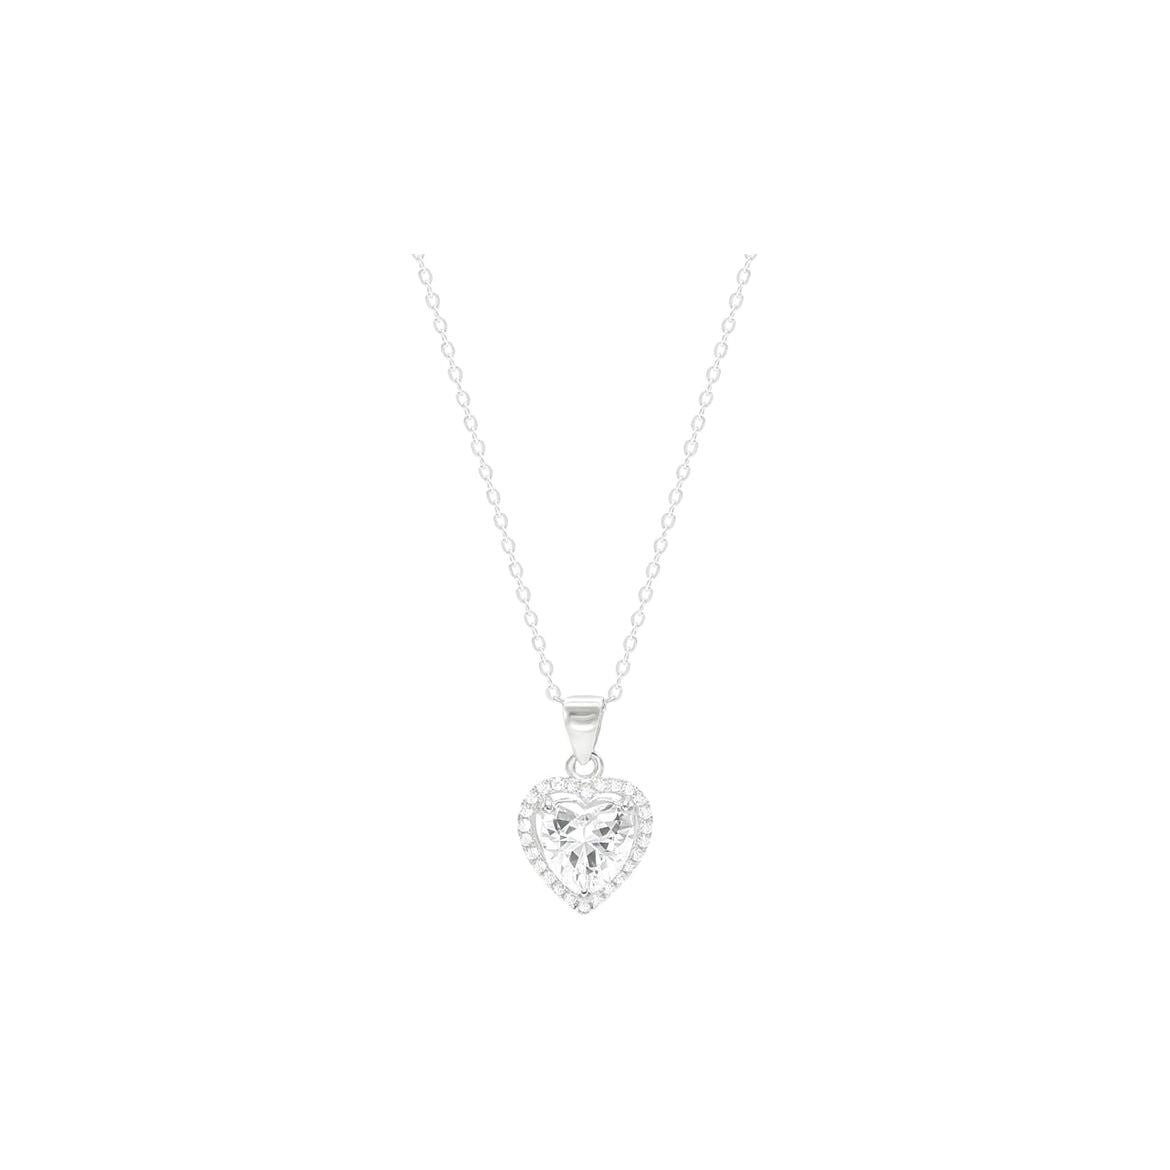 Sterling Silver Halo Heart Pendant Necklace